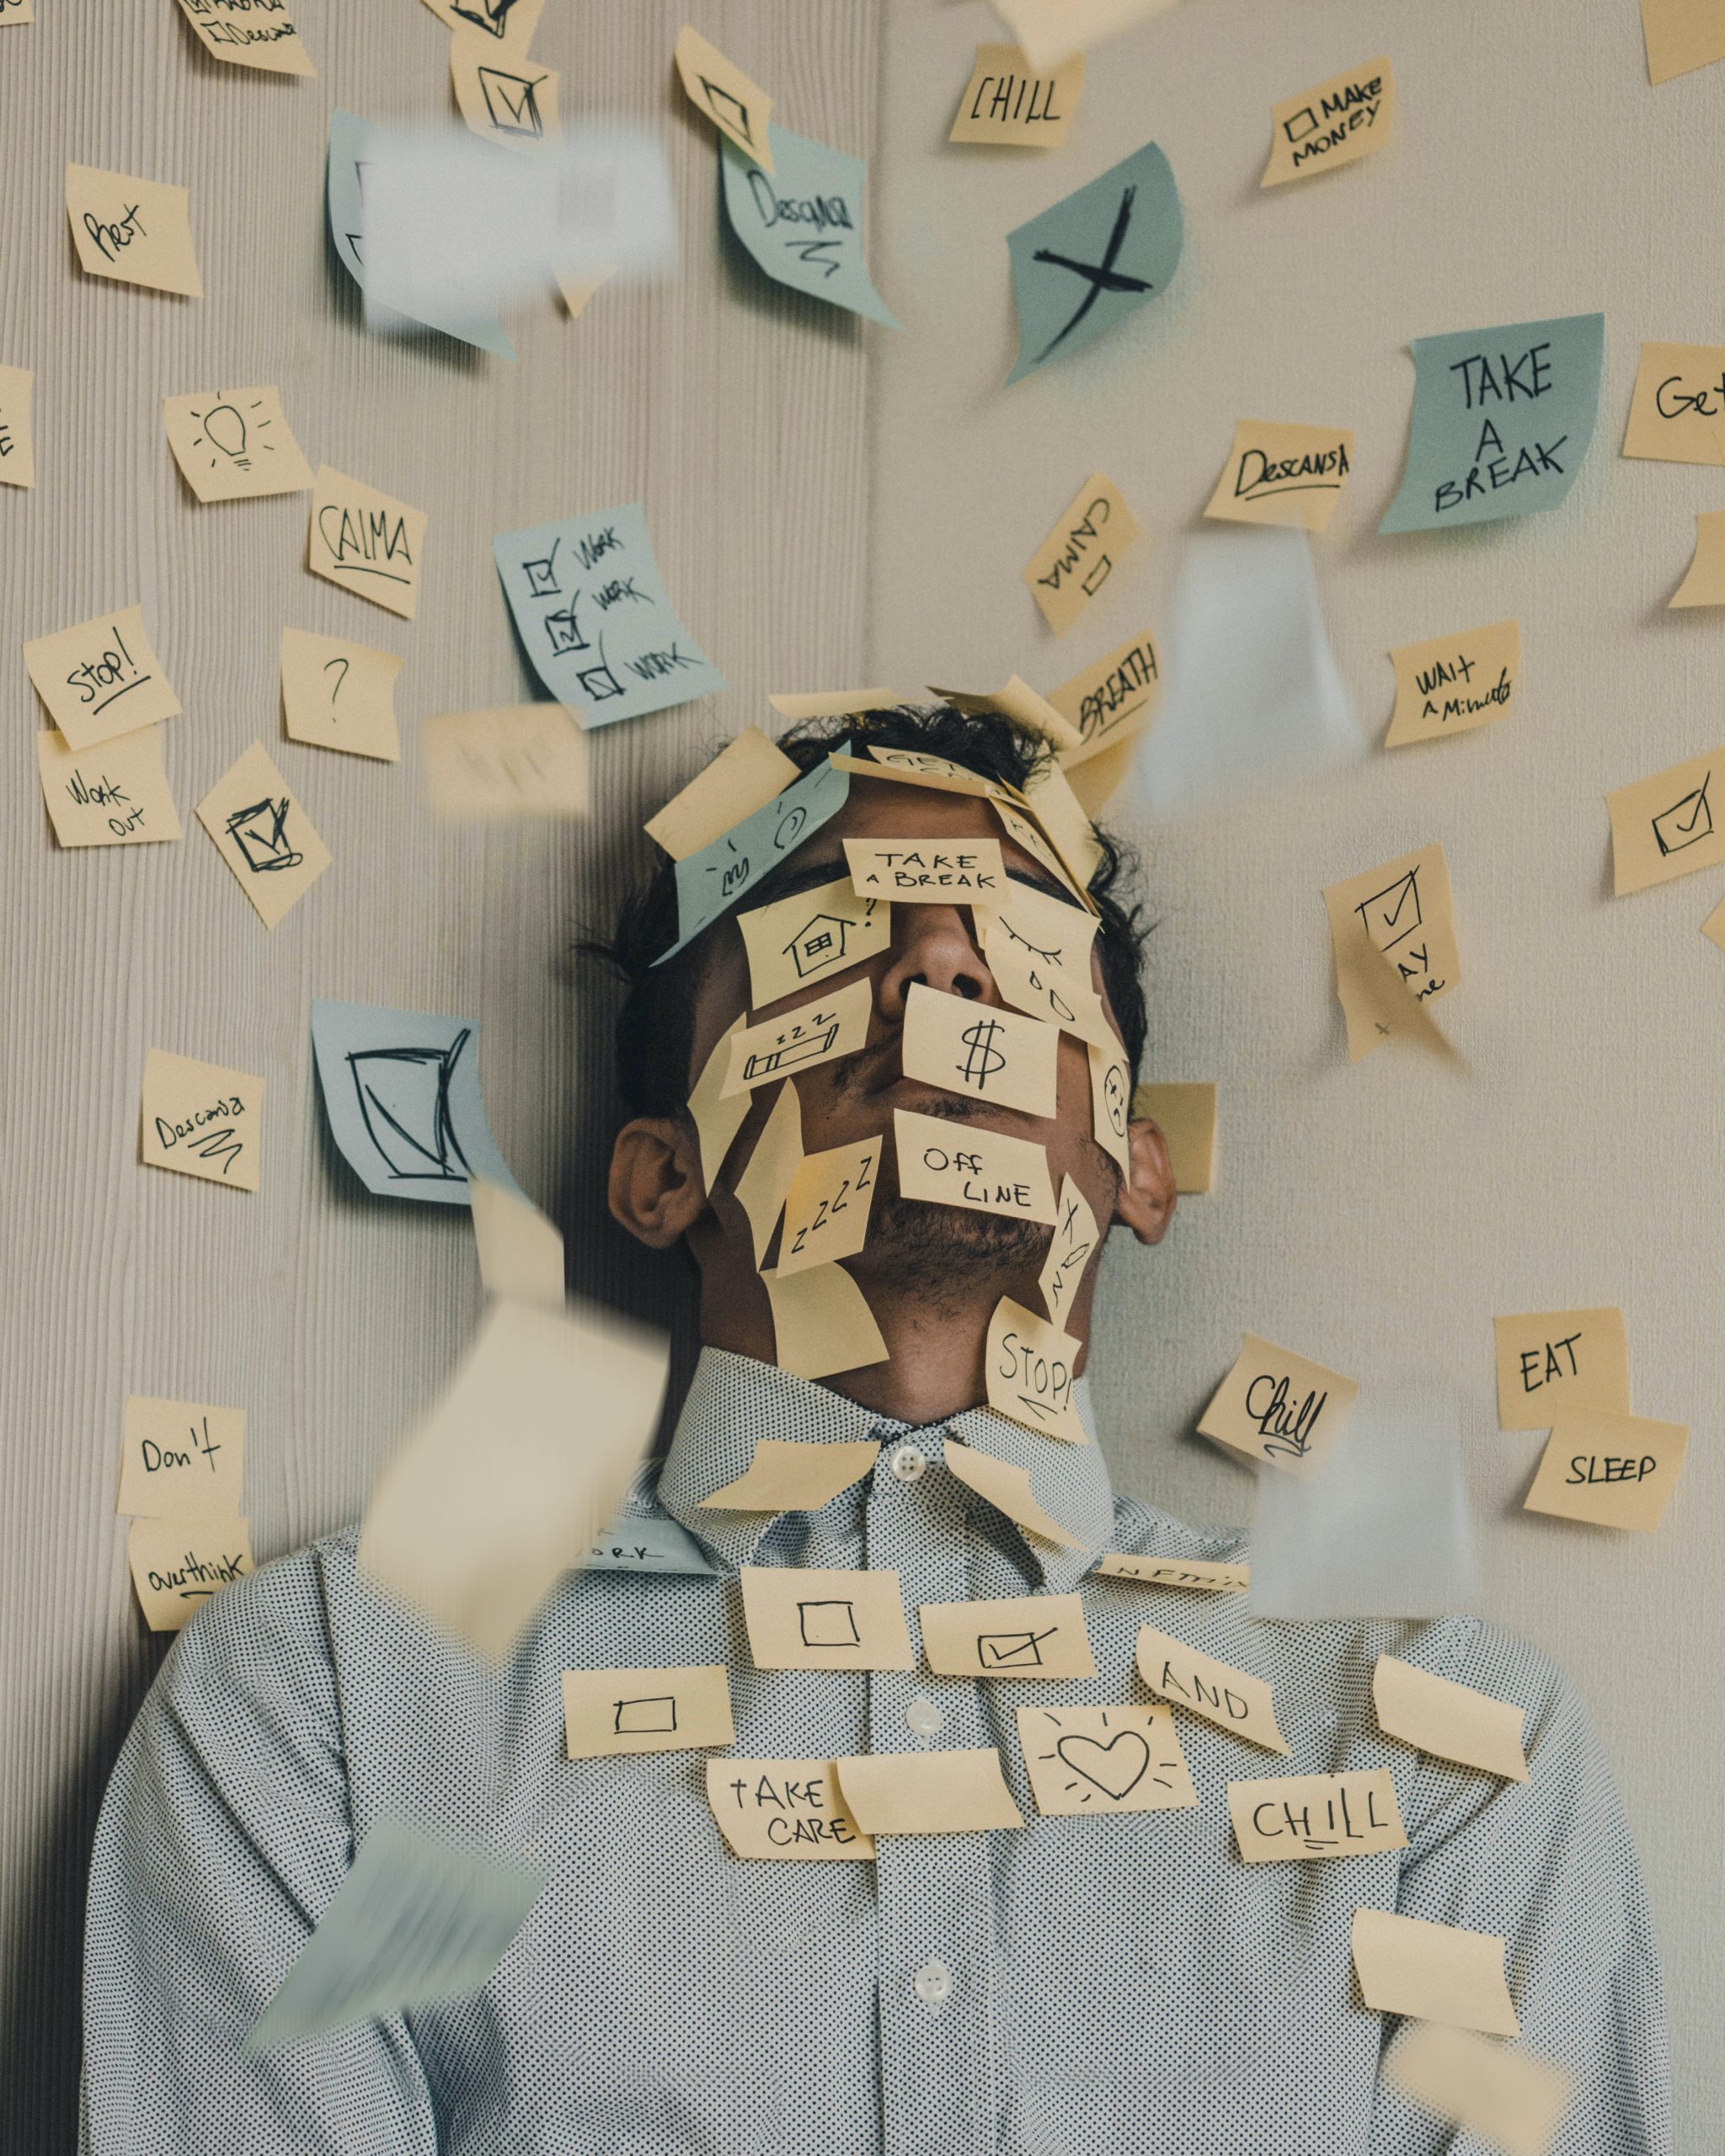 A man covered in and surrounded by dozens of sticky notes, each with a different to-do item